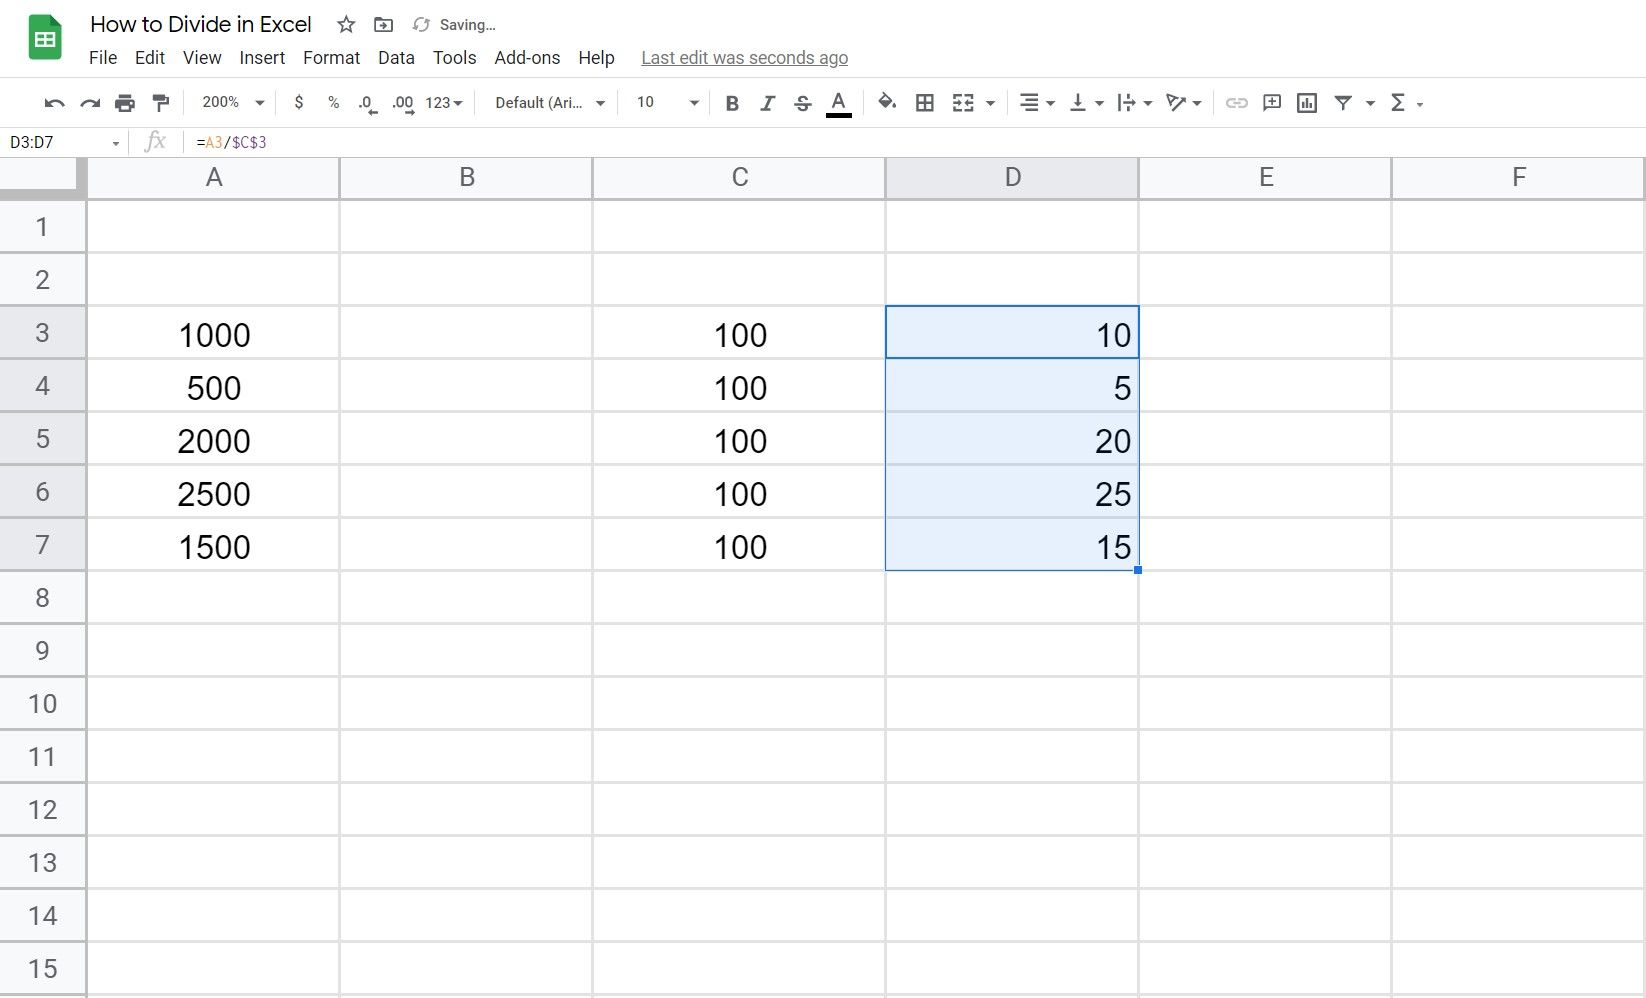 How to divide in Excel